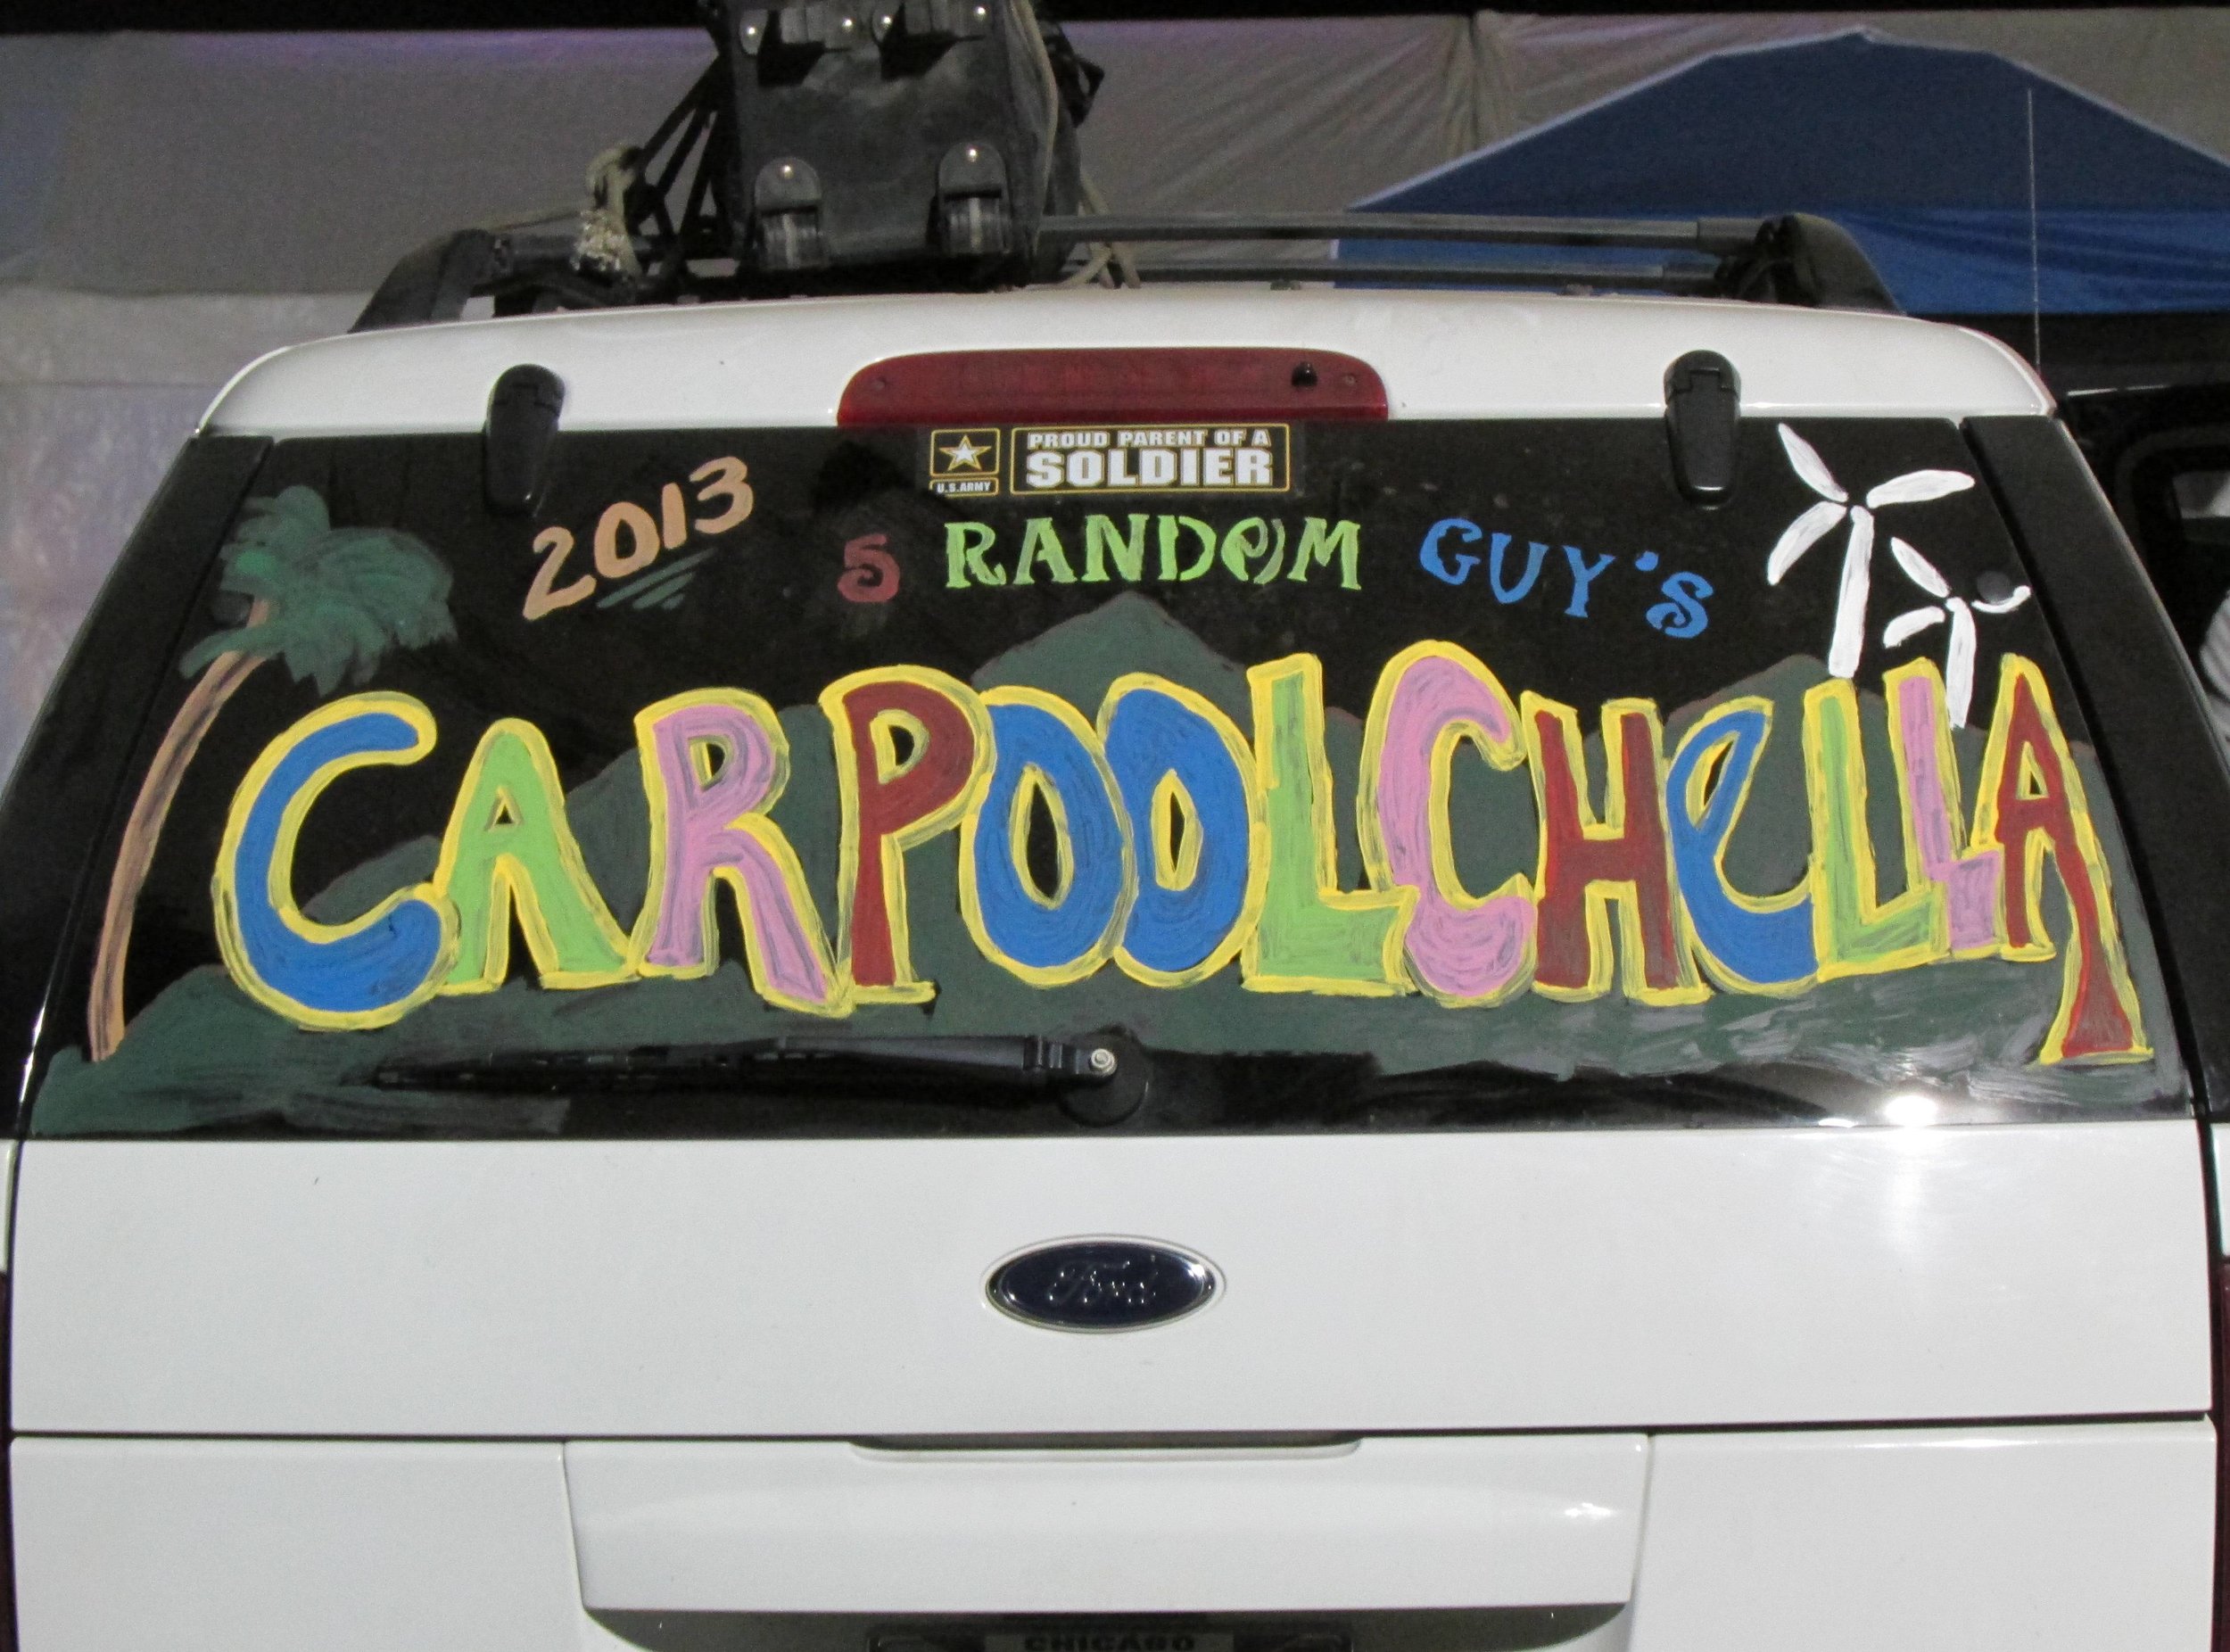 6 - Spotted some entries to Carpoolchella, Coachella's sustainability initiative & ticket lottery.JPG